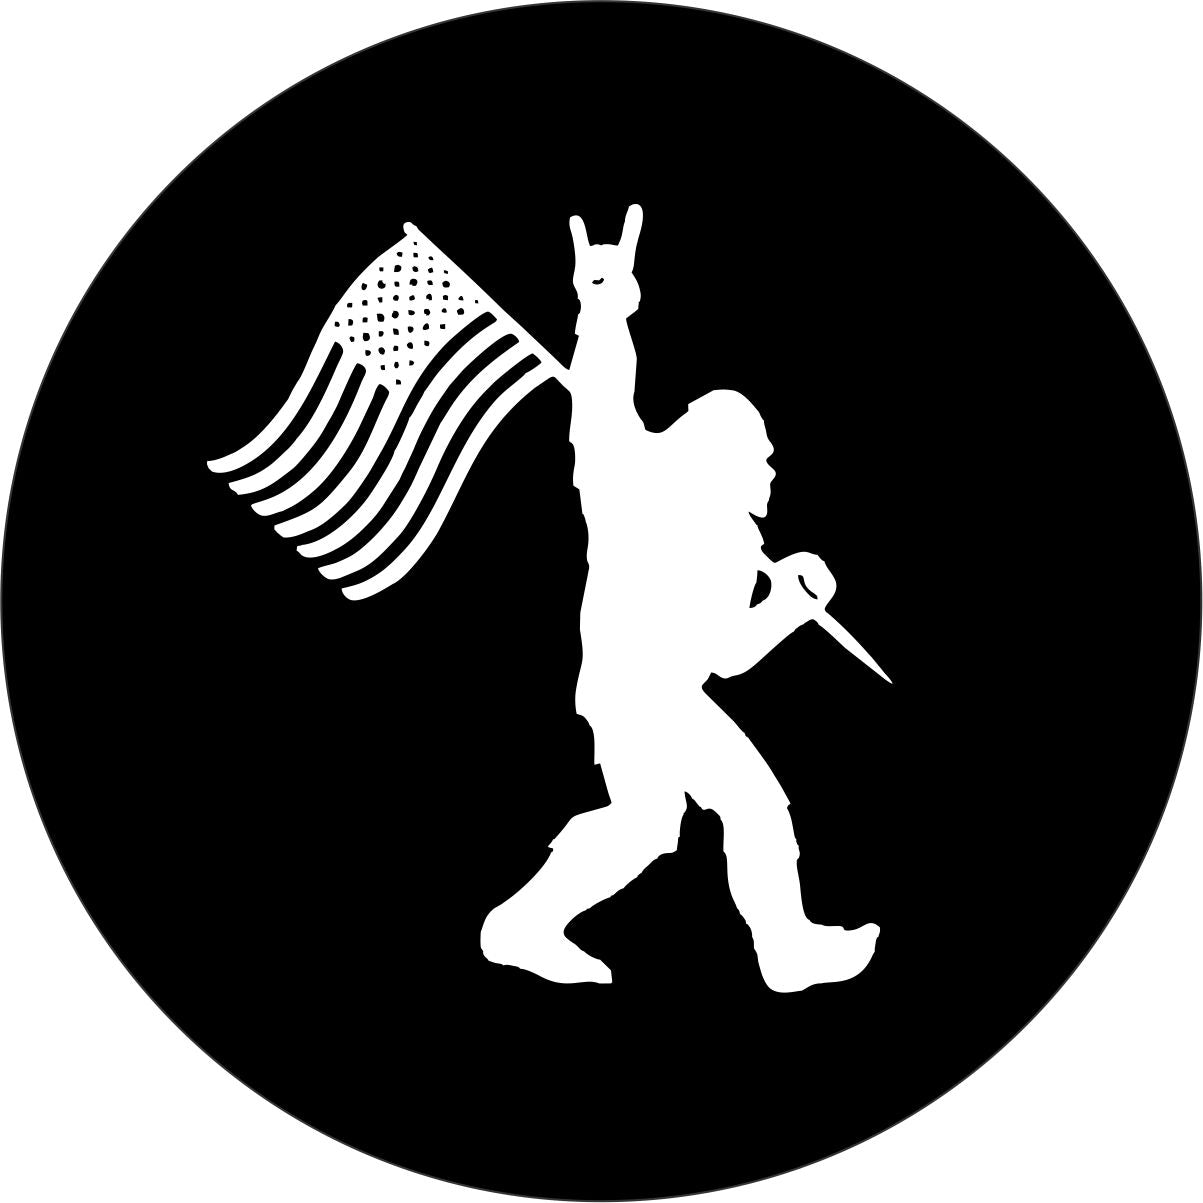 Spare tire cover design of Sasquatch walking by holding the American flag and throwing up the rock on sign with his hand. 